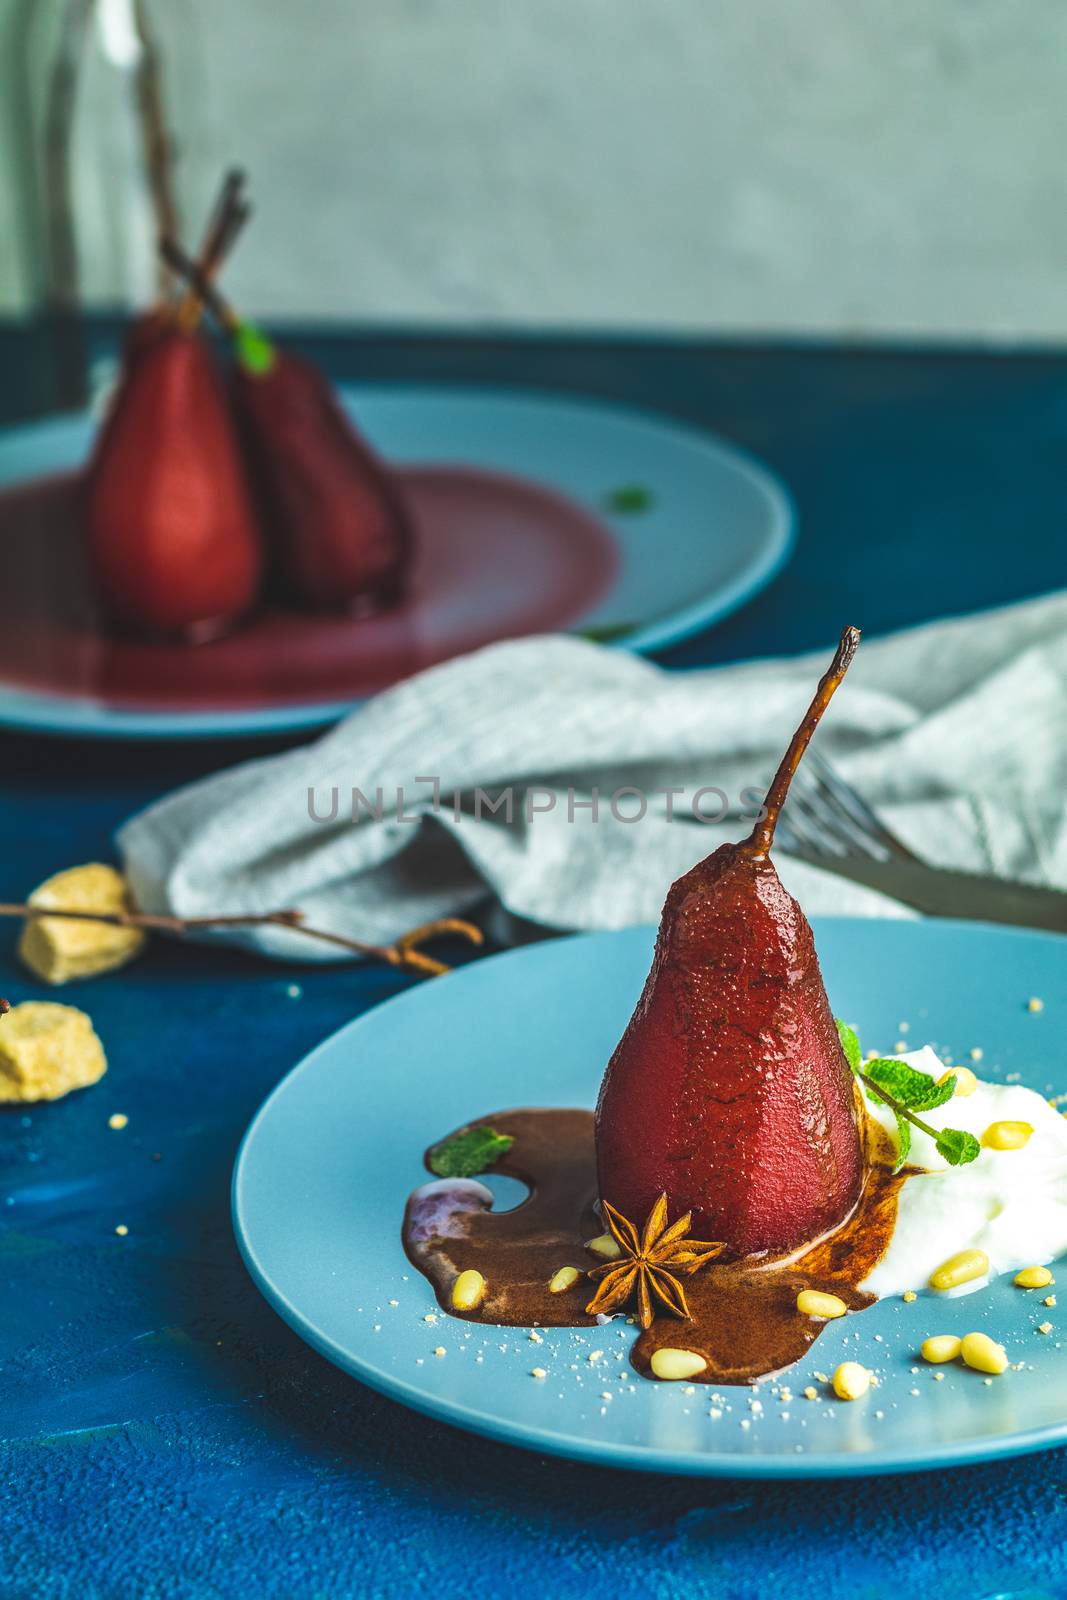 Traditional dessert pears stewed in red wine with chocolate sauc by ArtSvitlyna